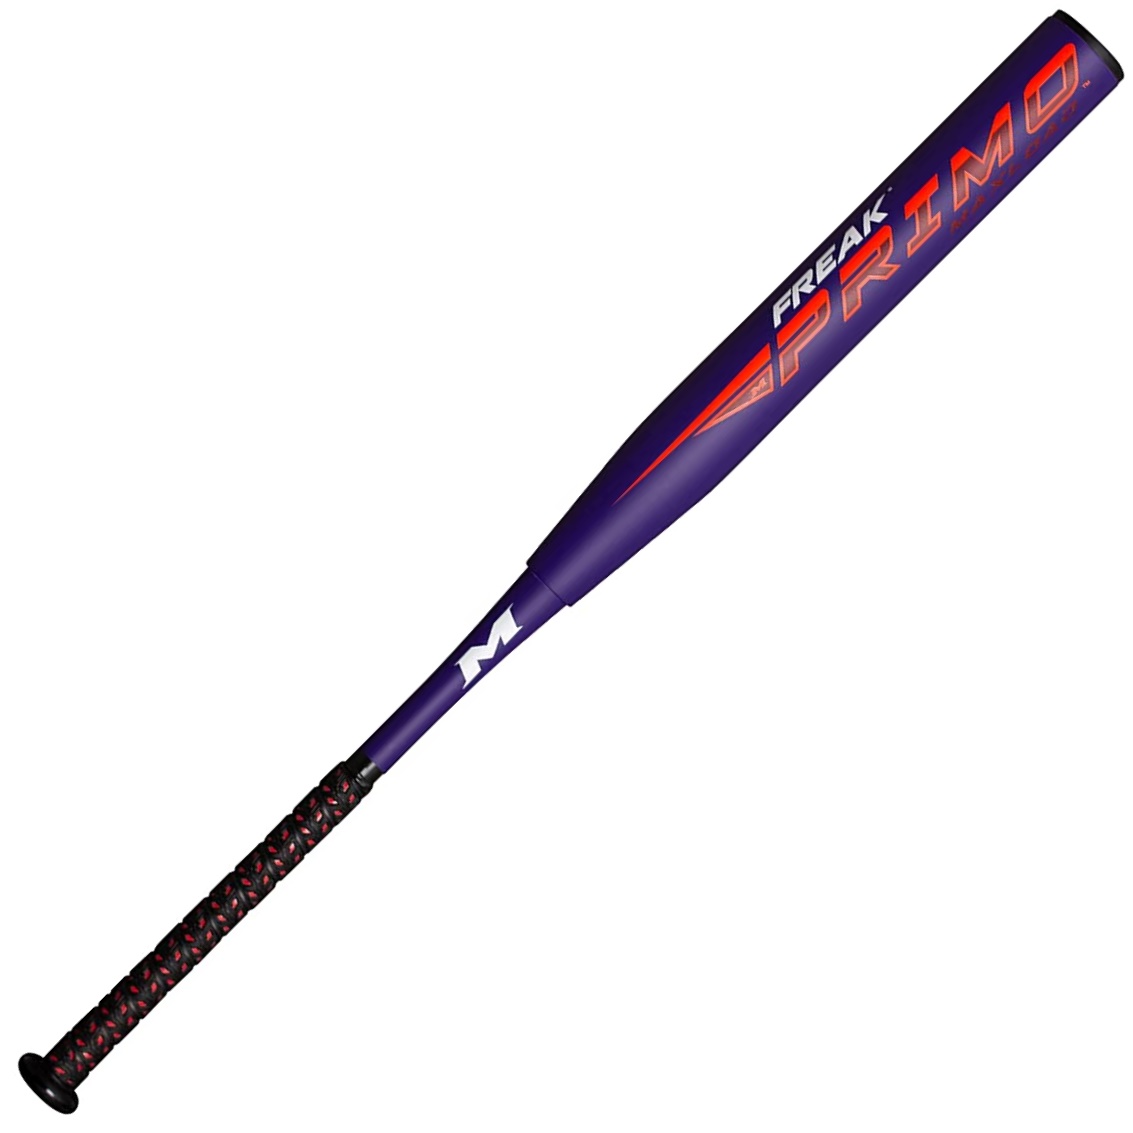 miken-2022-freak-primo-maxload-usssa-slowpitch-softball-bat-14-barrel-34-inch-27-oz MP22MU-3-27 Miken  <h1 id=title class=a-size-large a-spacing-none><span id=productTitle class=a-size-large product-title-word-break>Miken Freak Primo Maxload USSSA